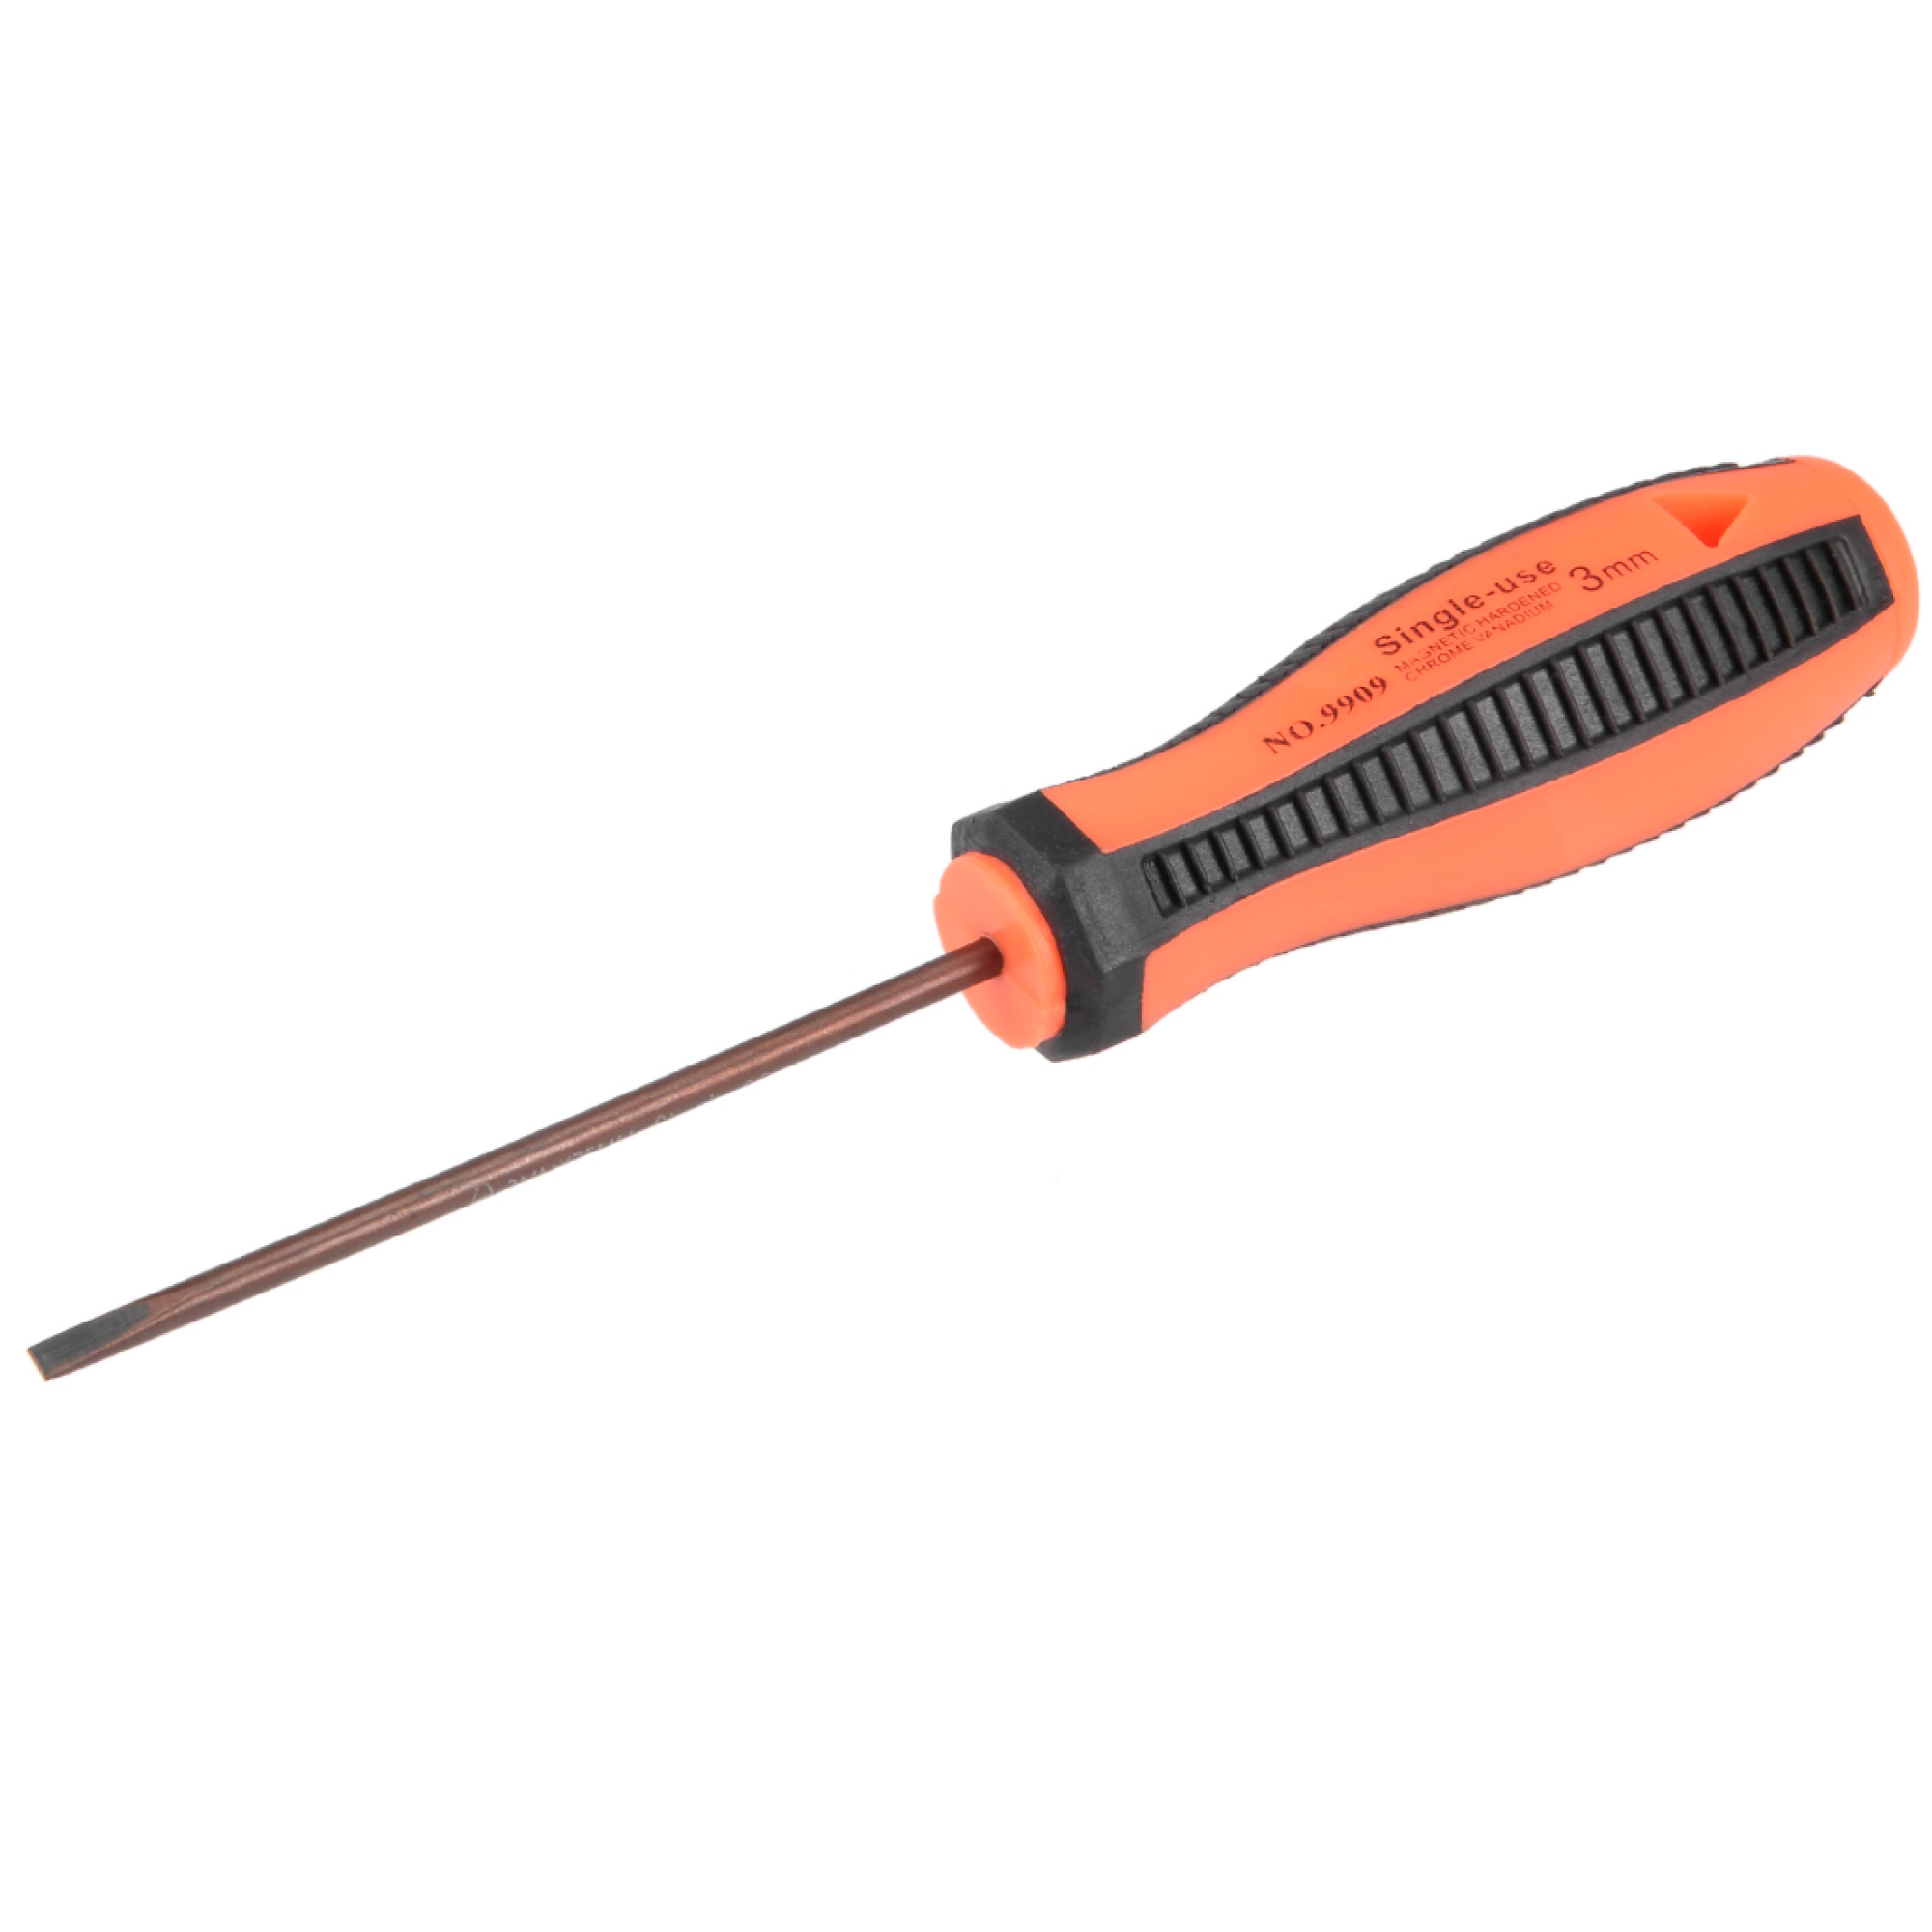 3mm Slotted Magnetic Screwdriver 3" Round Shaft Comfort Grip